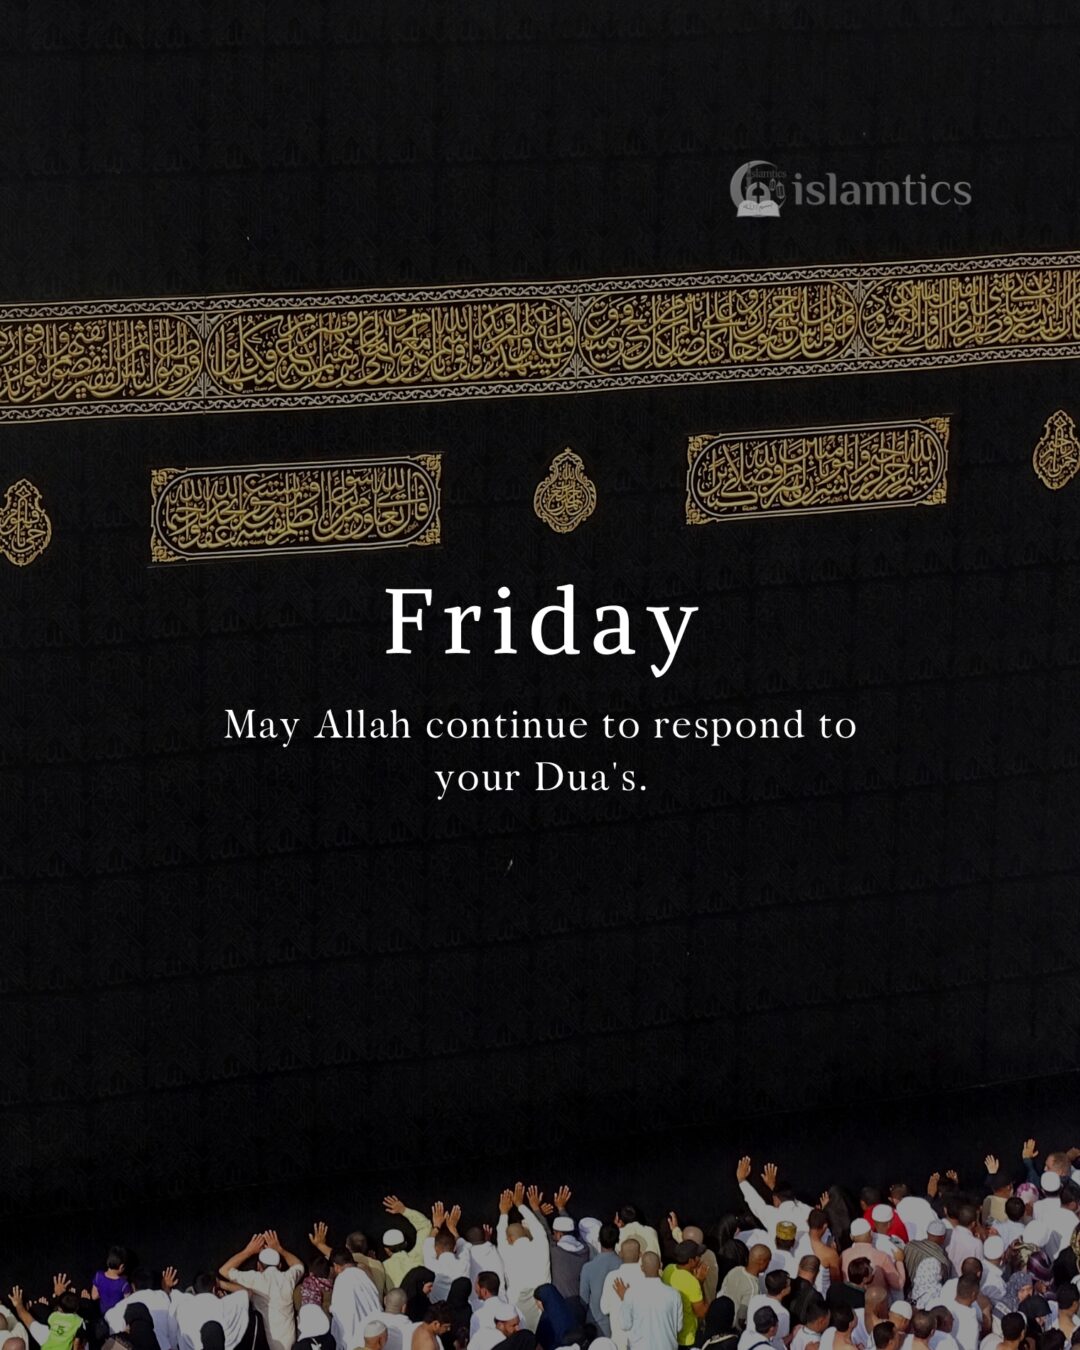 May Allah continue to respond to your Dua’s